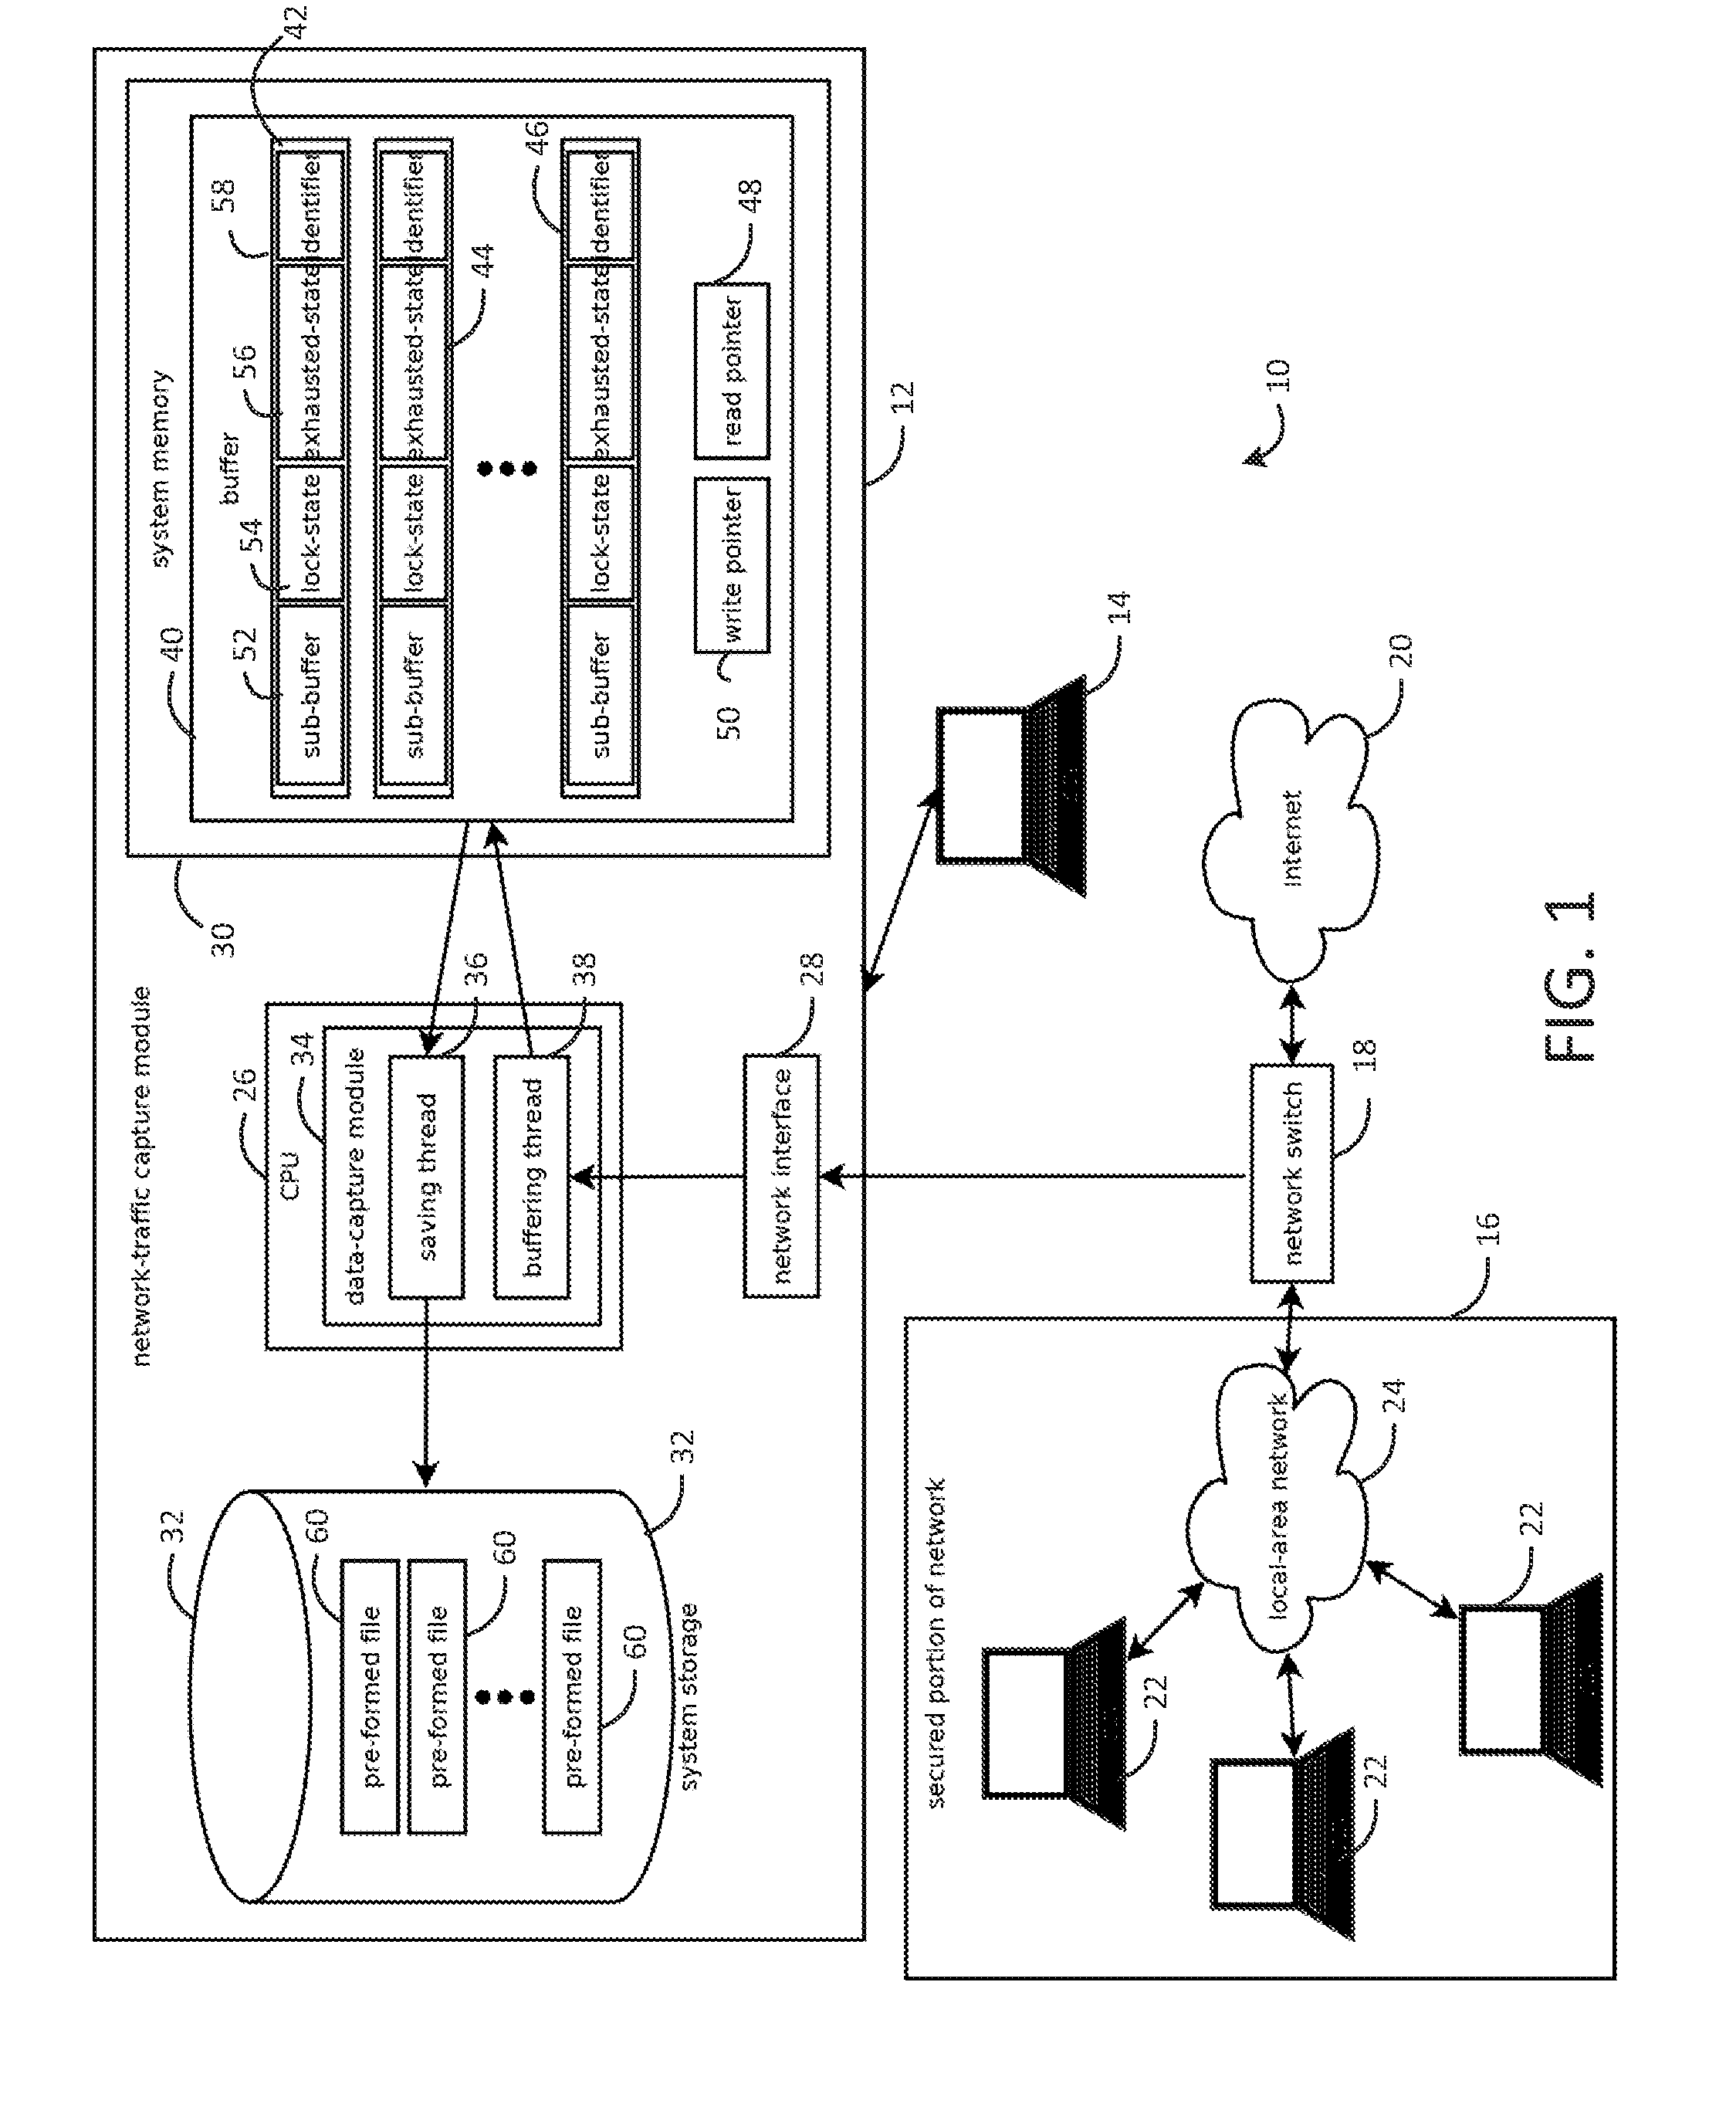 Systems and methods for capturing or replaying time-series data